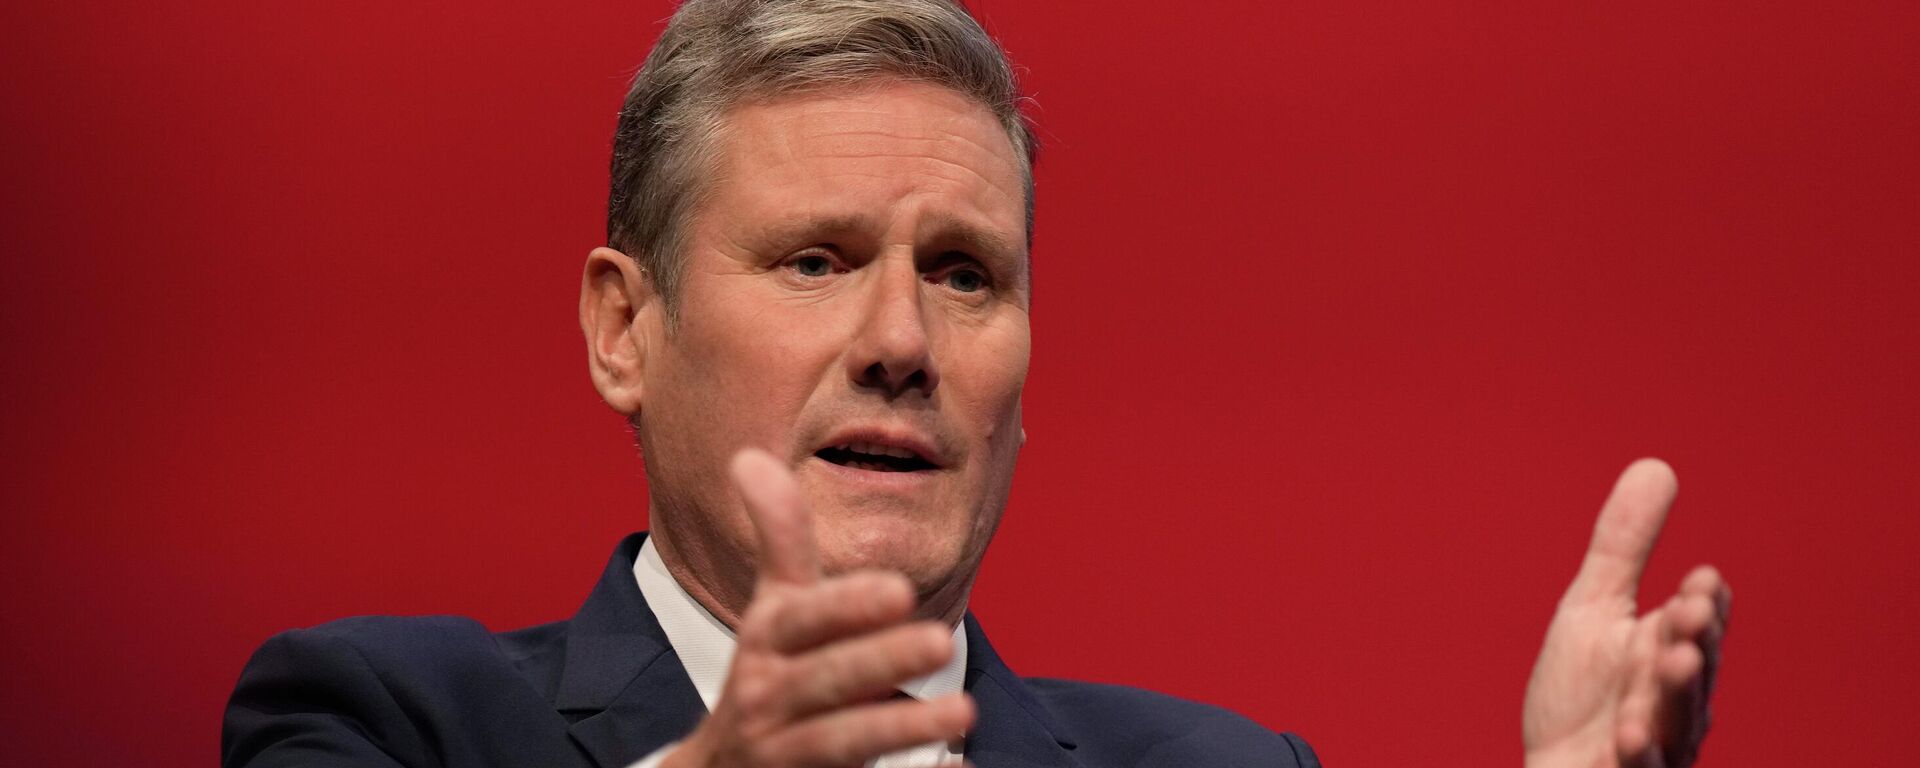 Leader of the British Labour Party Keir Starmer gestures as he makes his keynote speech at the annual party conference in Brighton, England, Sept. 29, 2021 - Sputnik International, 1920, 12.06.2022